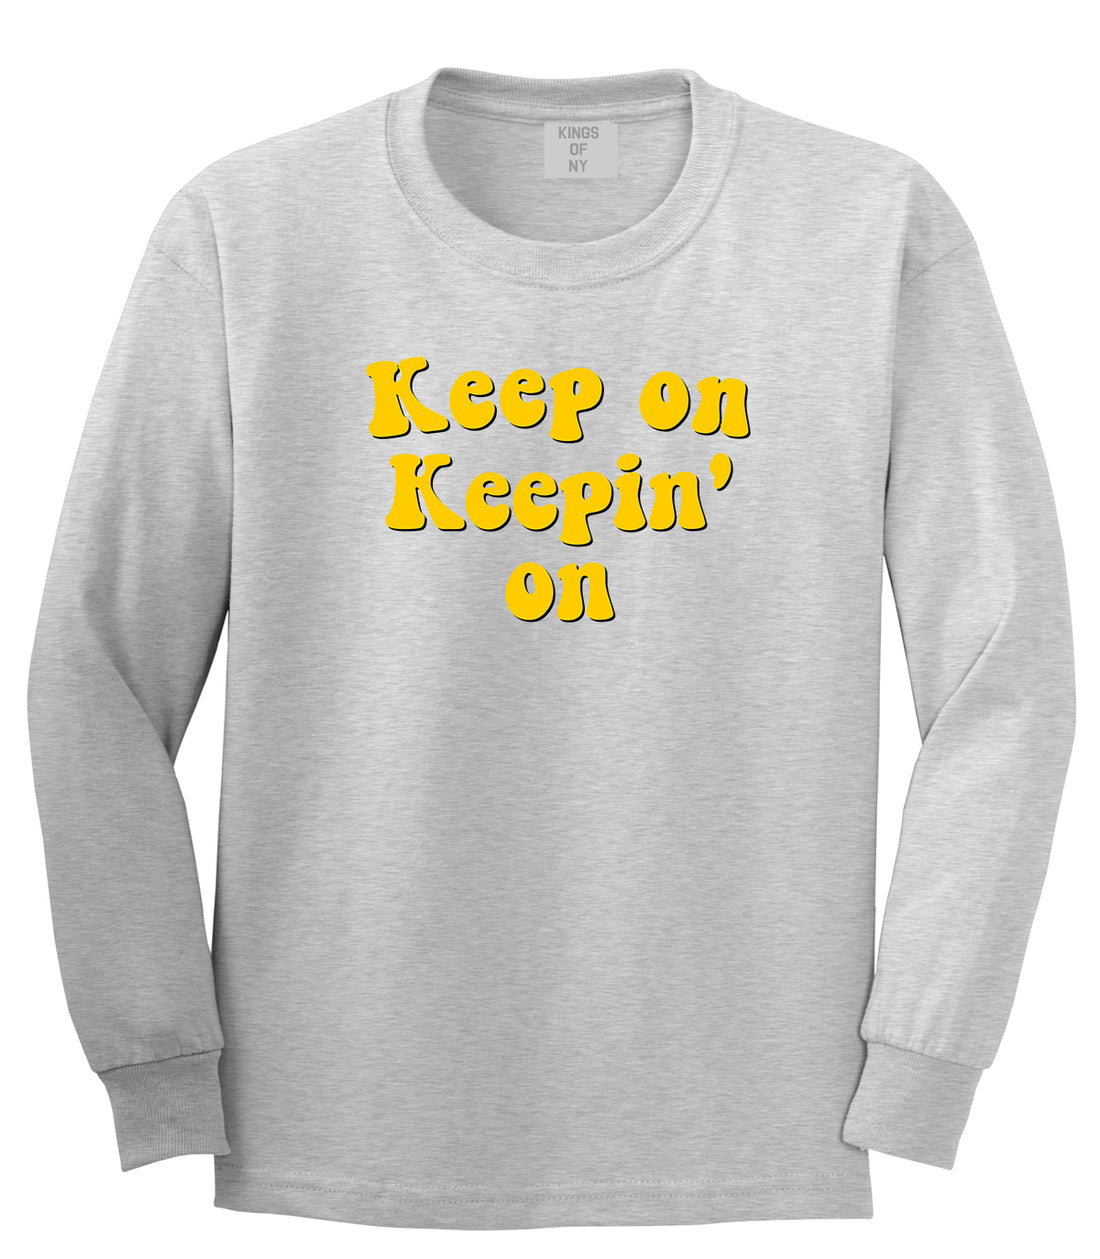 Keep On Keepin On Mens Long Sleeve T-Shirt Grey by Kings Of NY